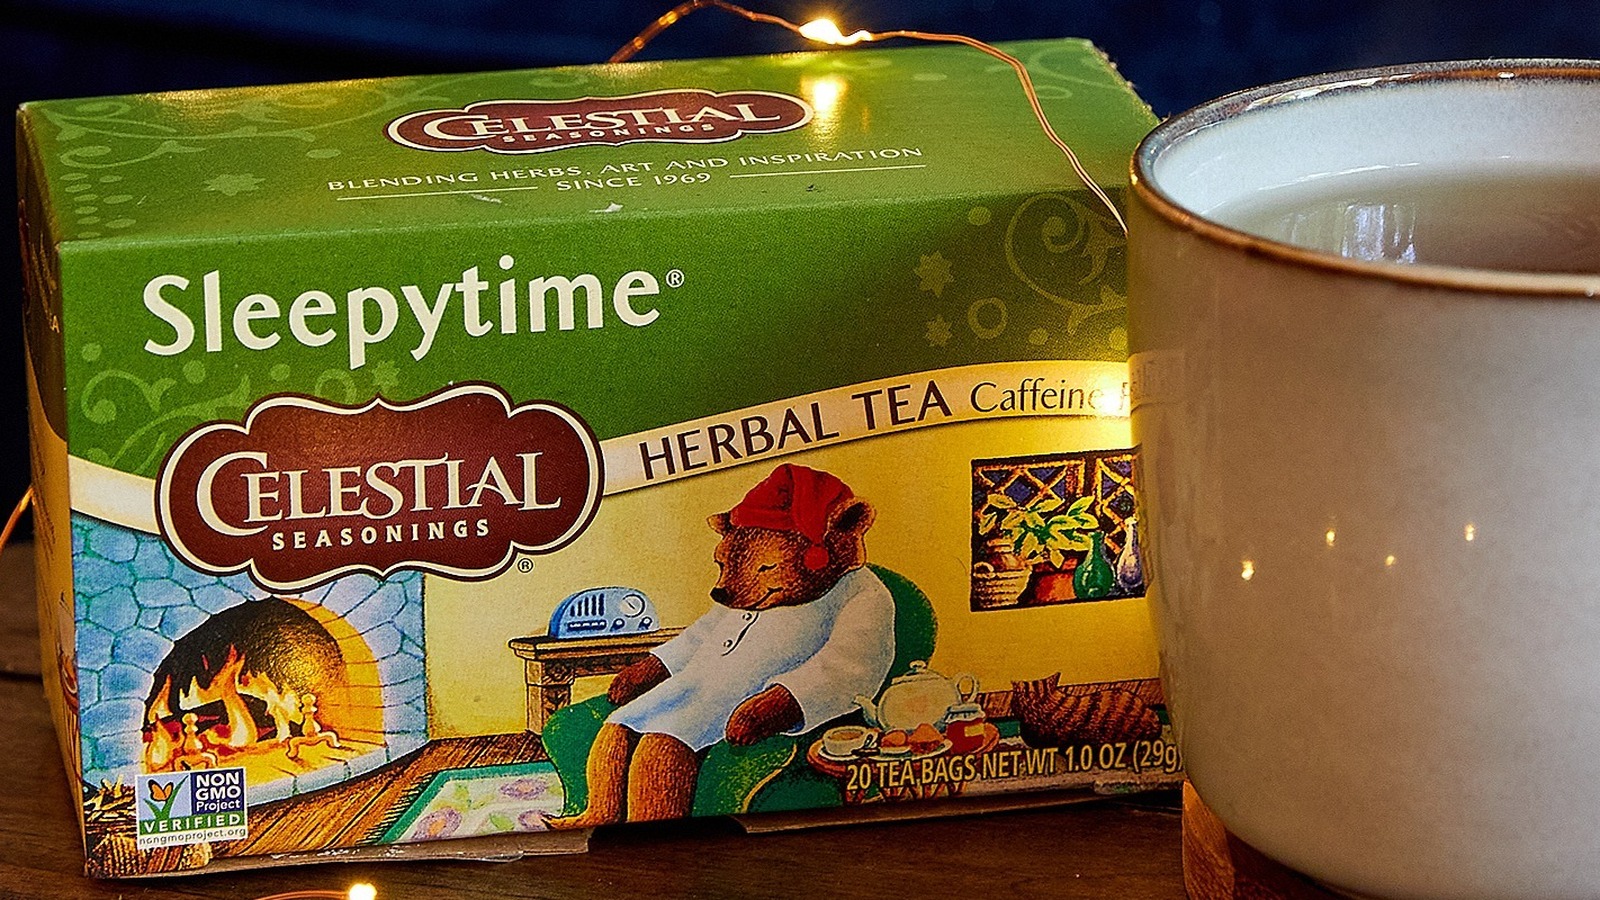 The Religious Origins Of The Famous Celestial Sleepytime Tea – Mashed